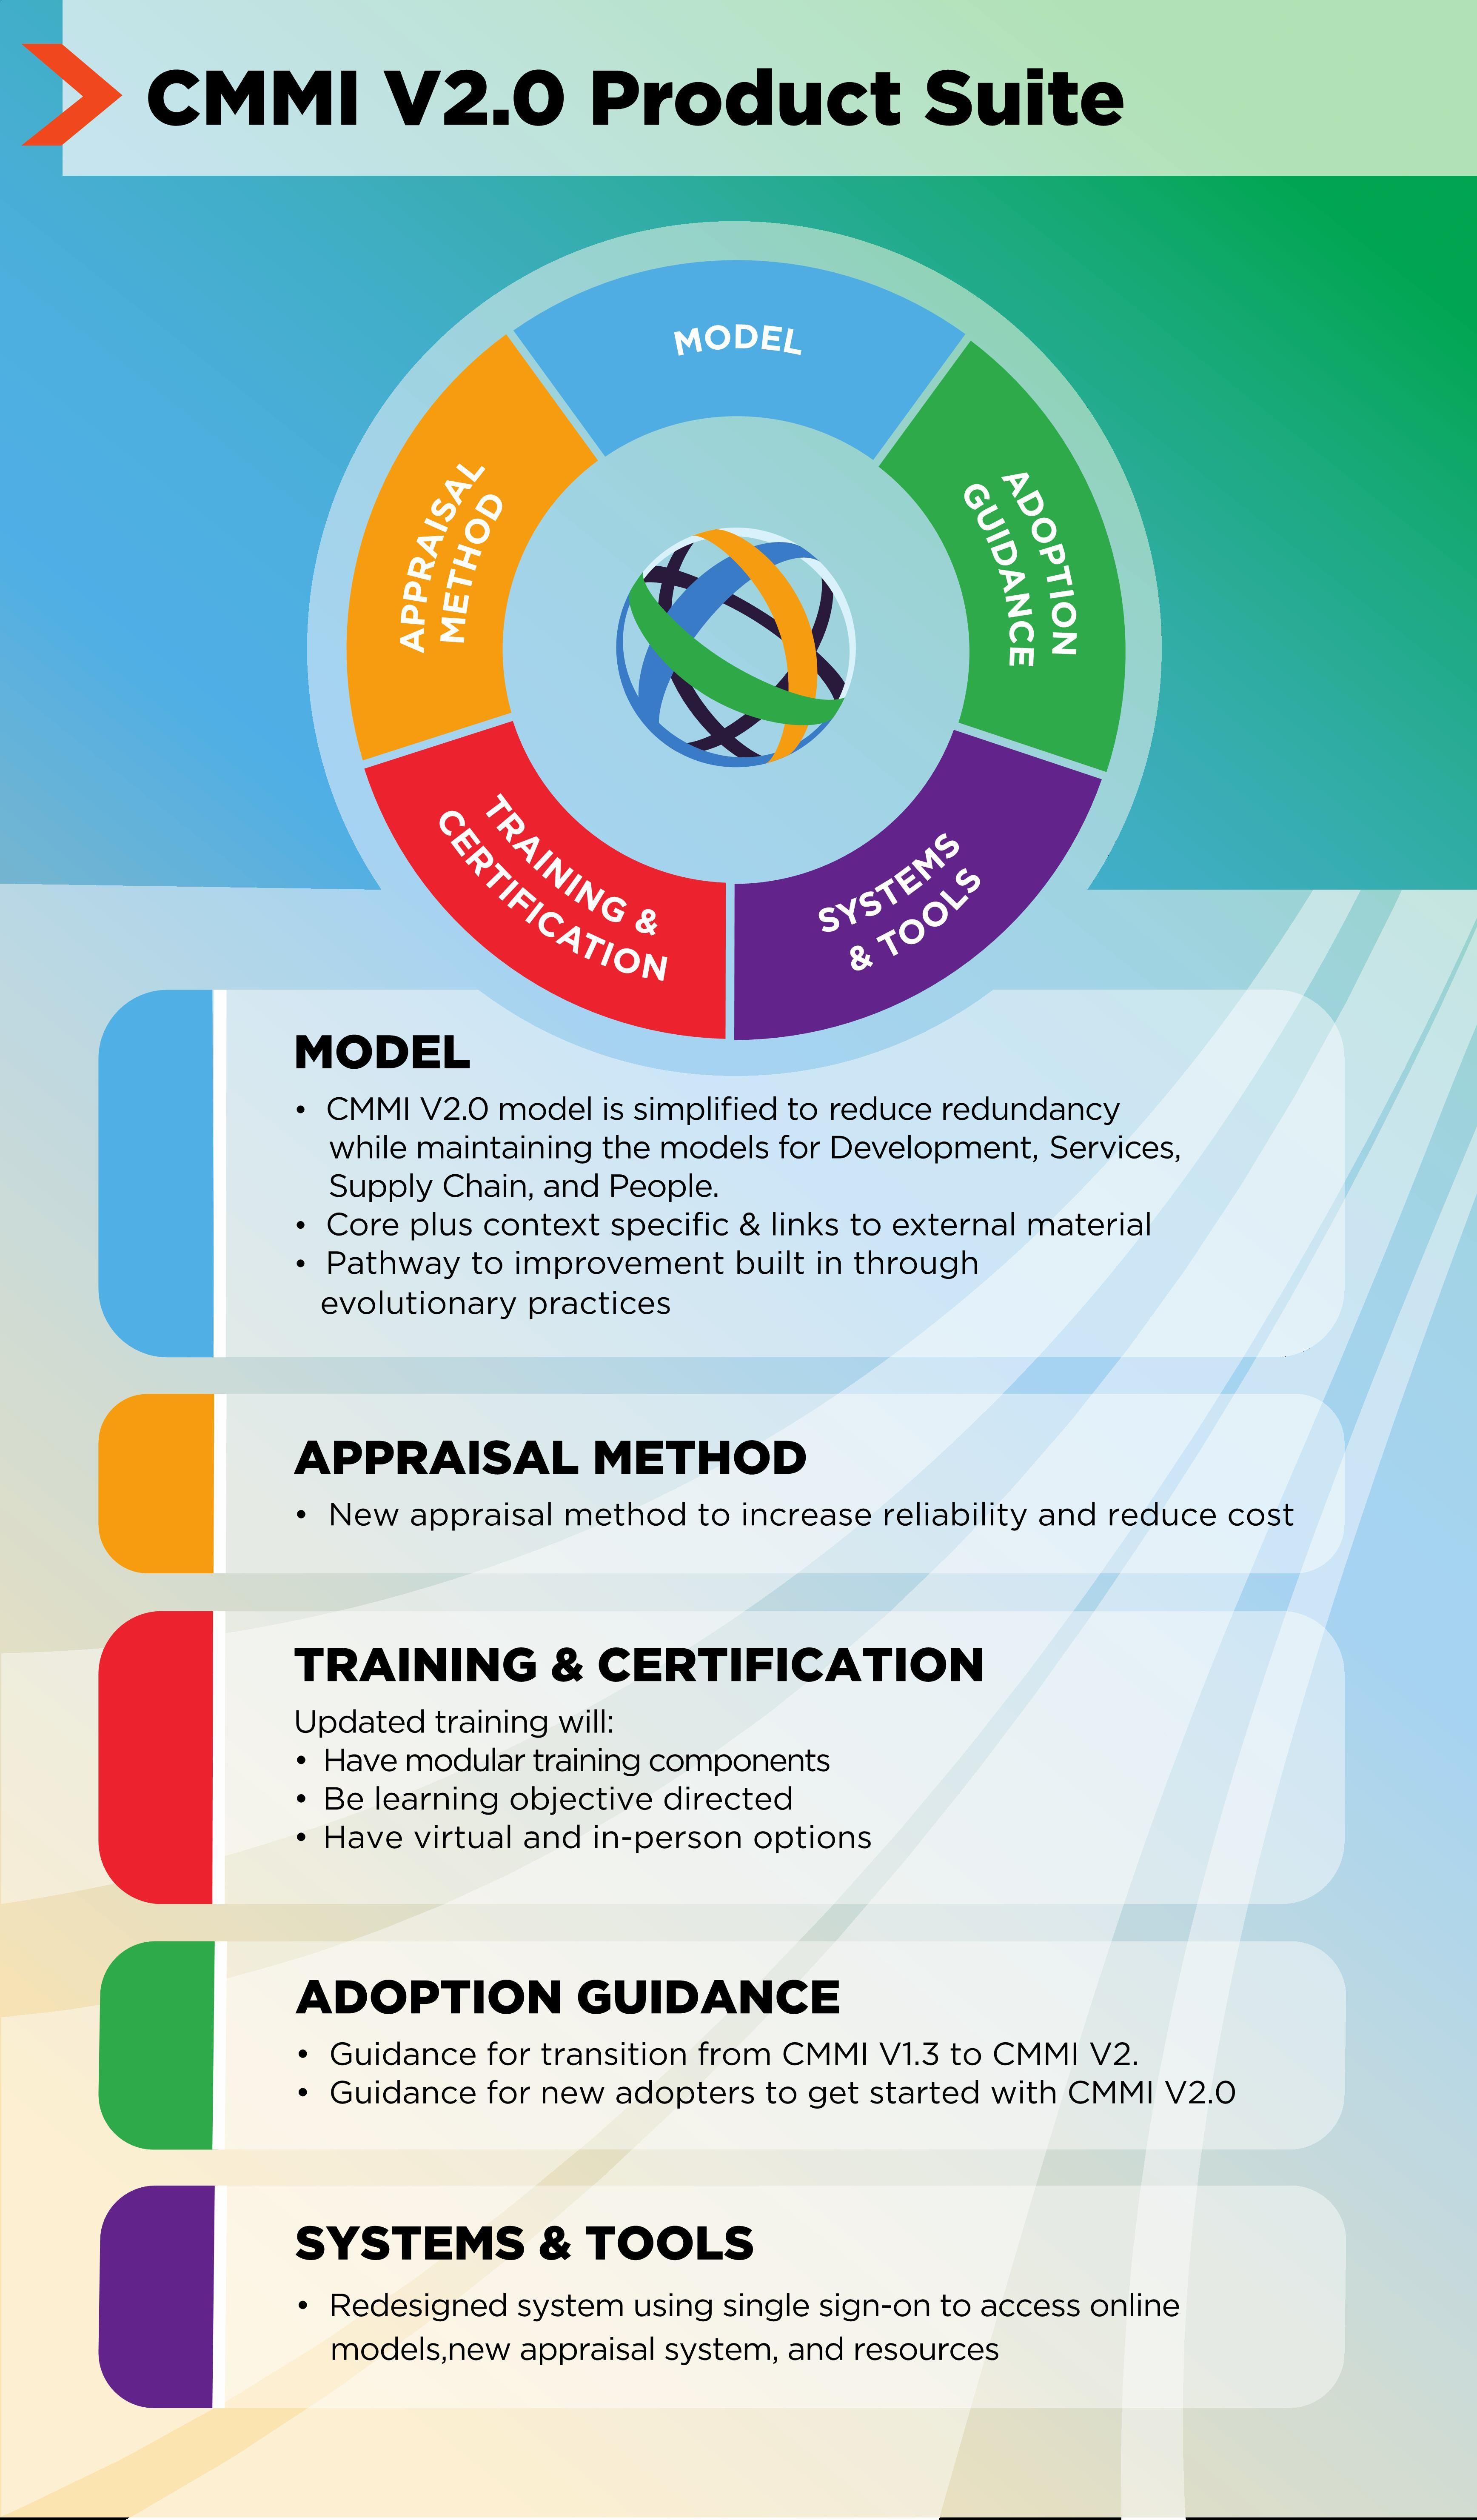 CMMI Logo - What is CMMI V2.0?